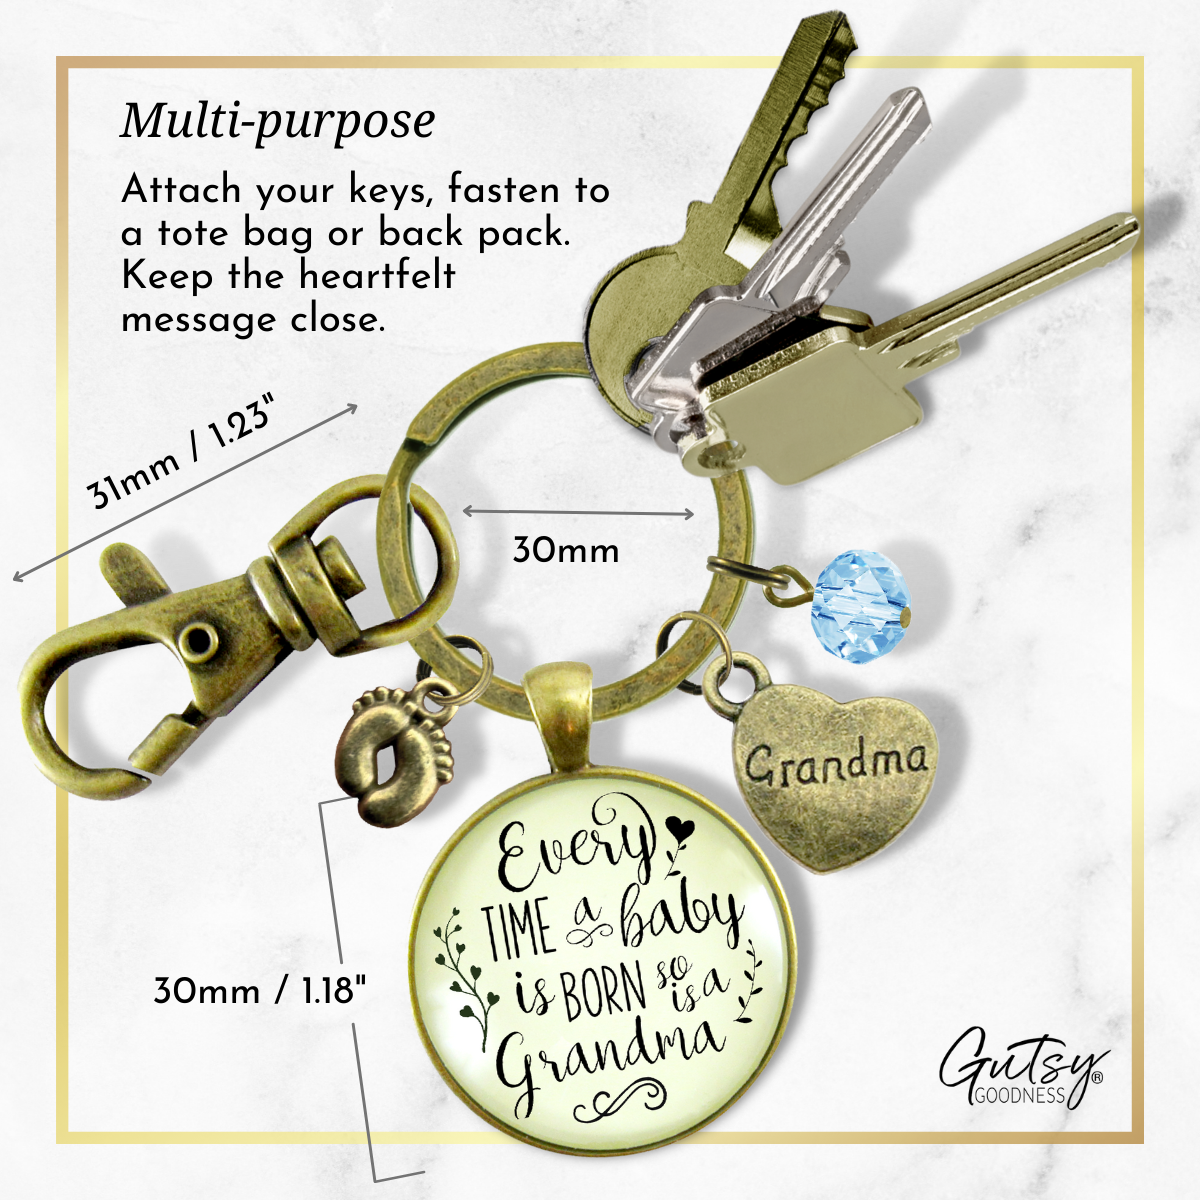 Baby Gender Reveal Keychain Every Time Born So Is Grandma Pregnancy Boy Announcement Gift Blue - Gutsy Goodness;Baby Gender Reveal Keychain Every Time Born So Is Grandma Pregnancy Boy Announcement Gift Blue - Gutsy Goodness Handmade Jewelry Gifts;Baby Gender Reveal Keychain Every Time Born So Is Grandma Pregnancy Boy Announcement Gift Blue